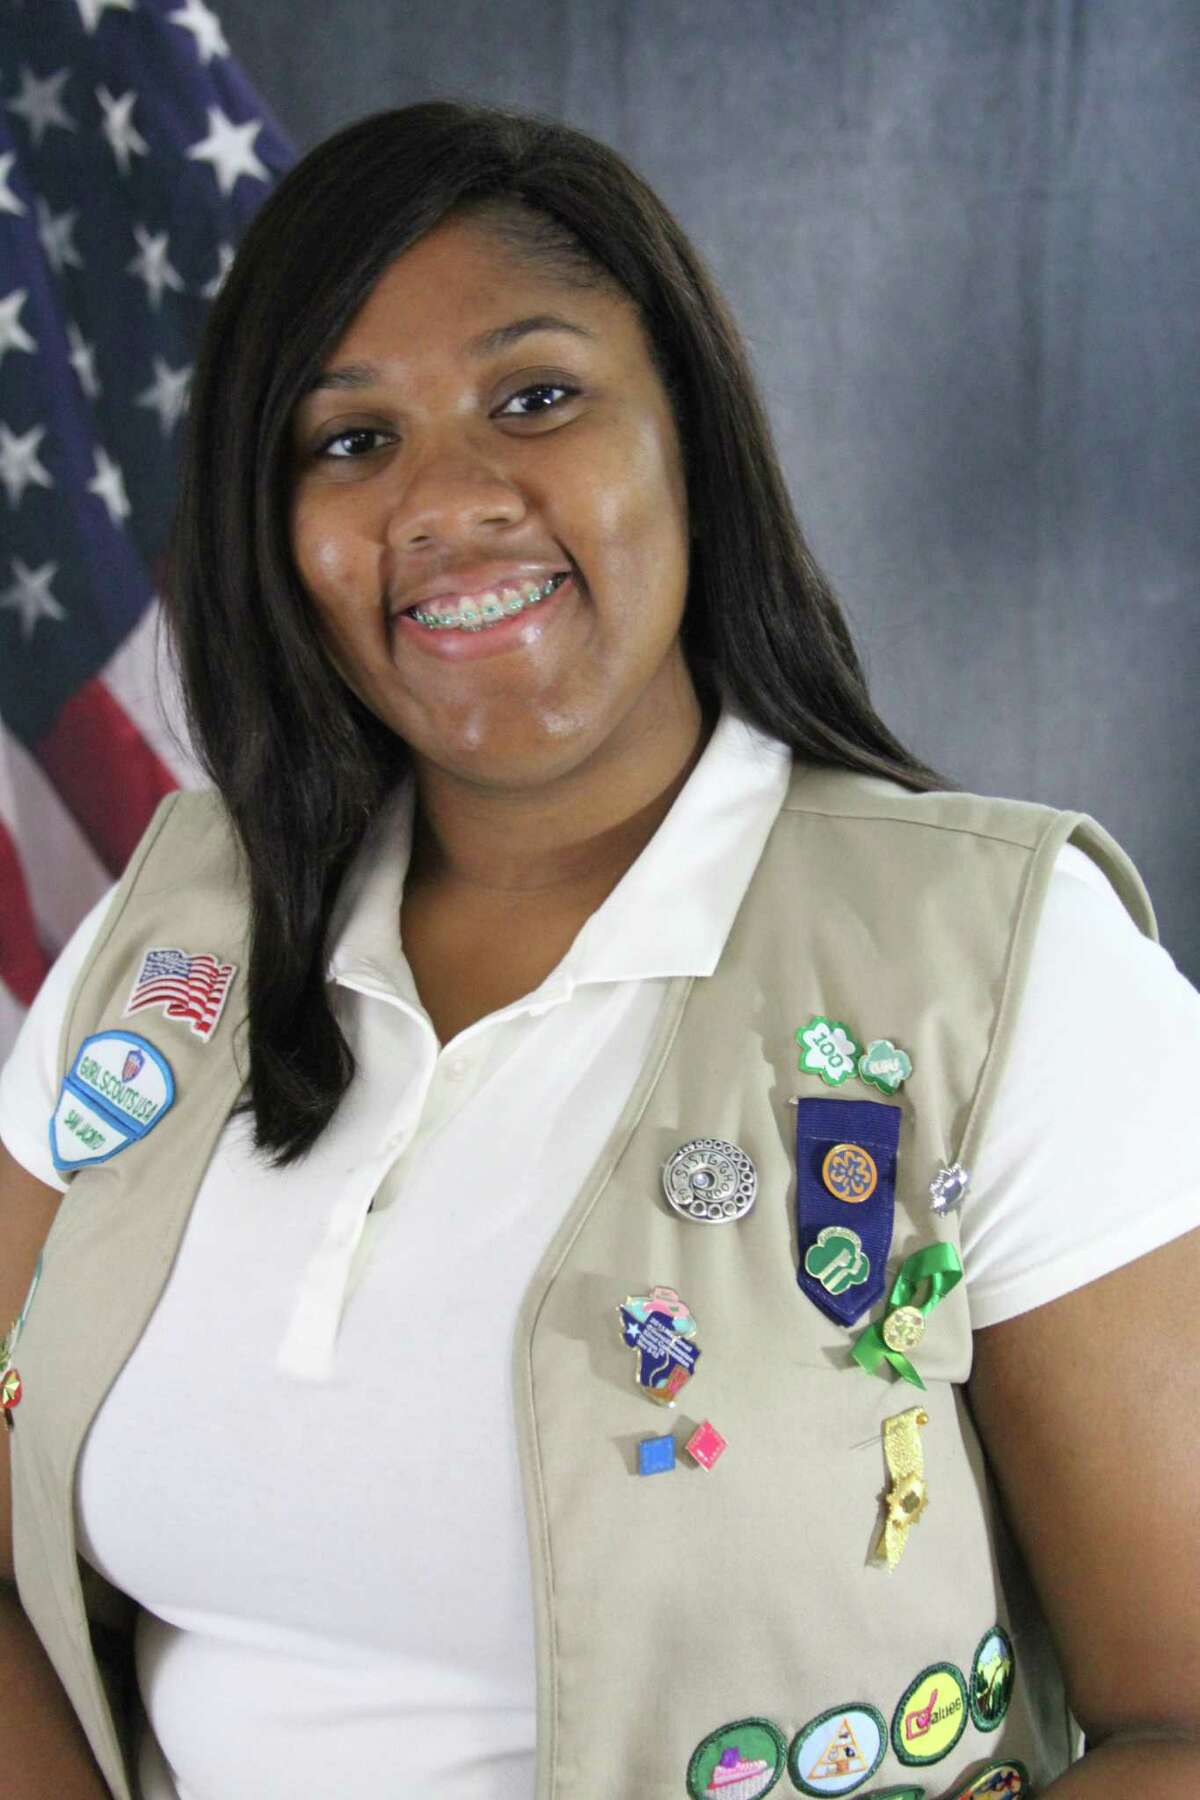 Makayla Williams, a graduate from Hightower High School, has earned the Girl Scout Gold Award, the highest honor in Girl Scouting. Makayla taught 46 students in her community the importance of healthy eating by developing the curriculum for a health class where the students learned to make fruit kabobs, trail mix and fruit smoothies. To learn more about the Girl Scout Gold Award, visit www.gssjc.org/goldawardgirlscout.